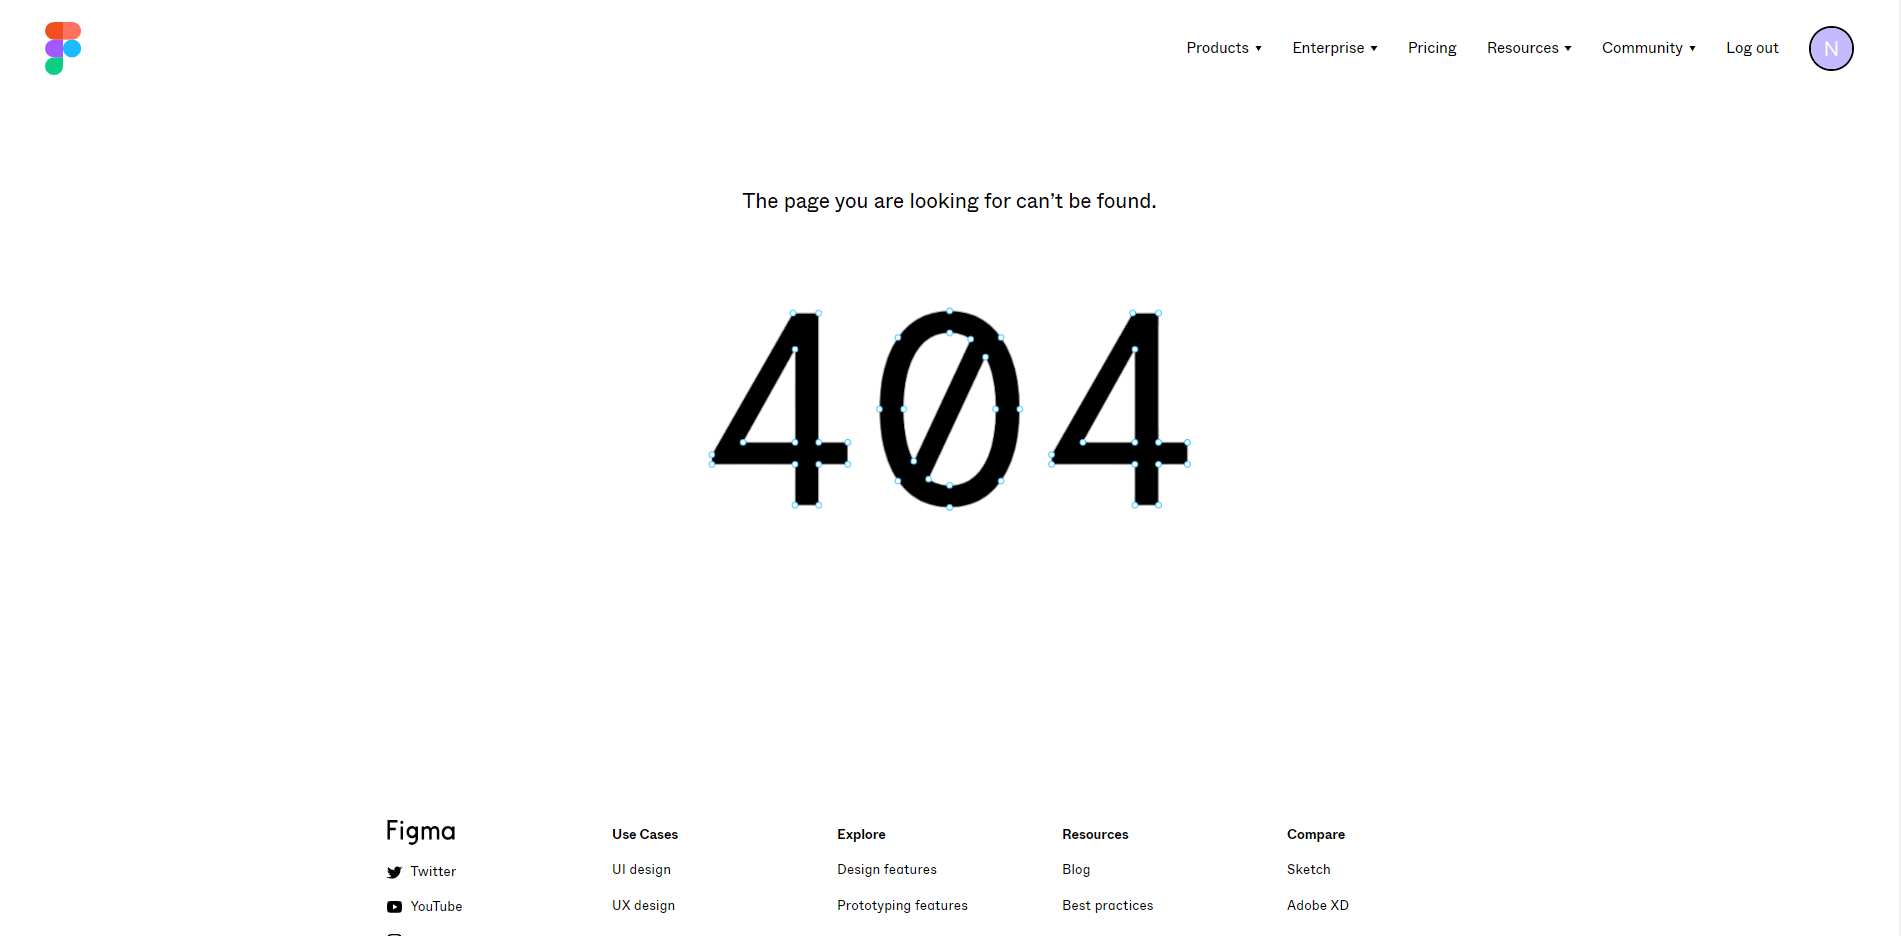 Figma 404 Not Found page design